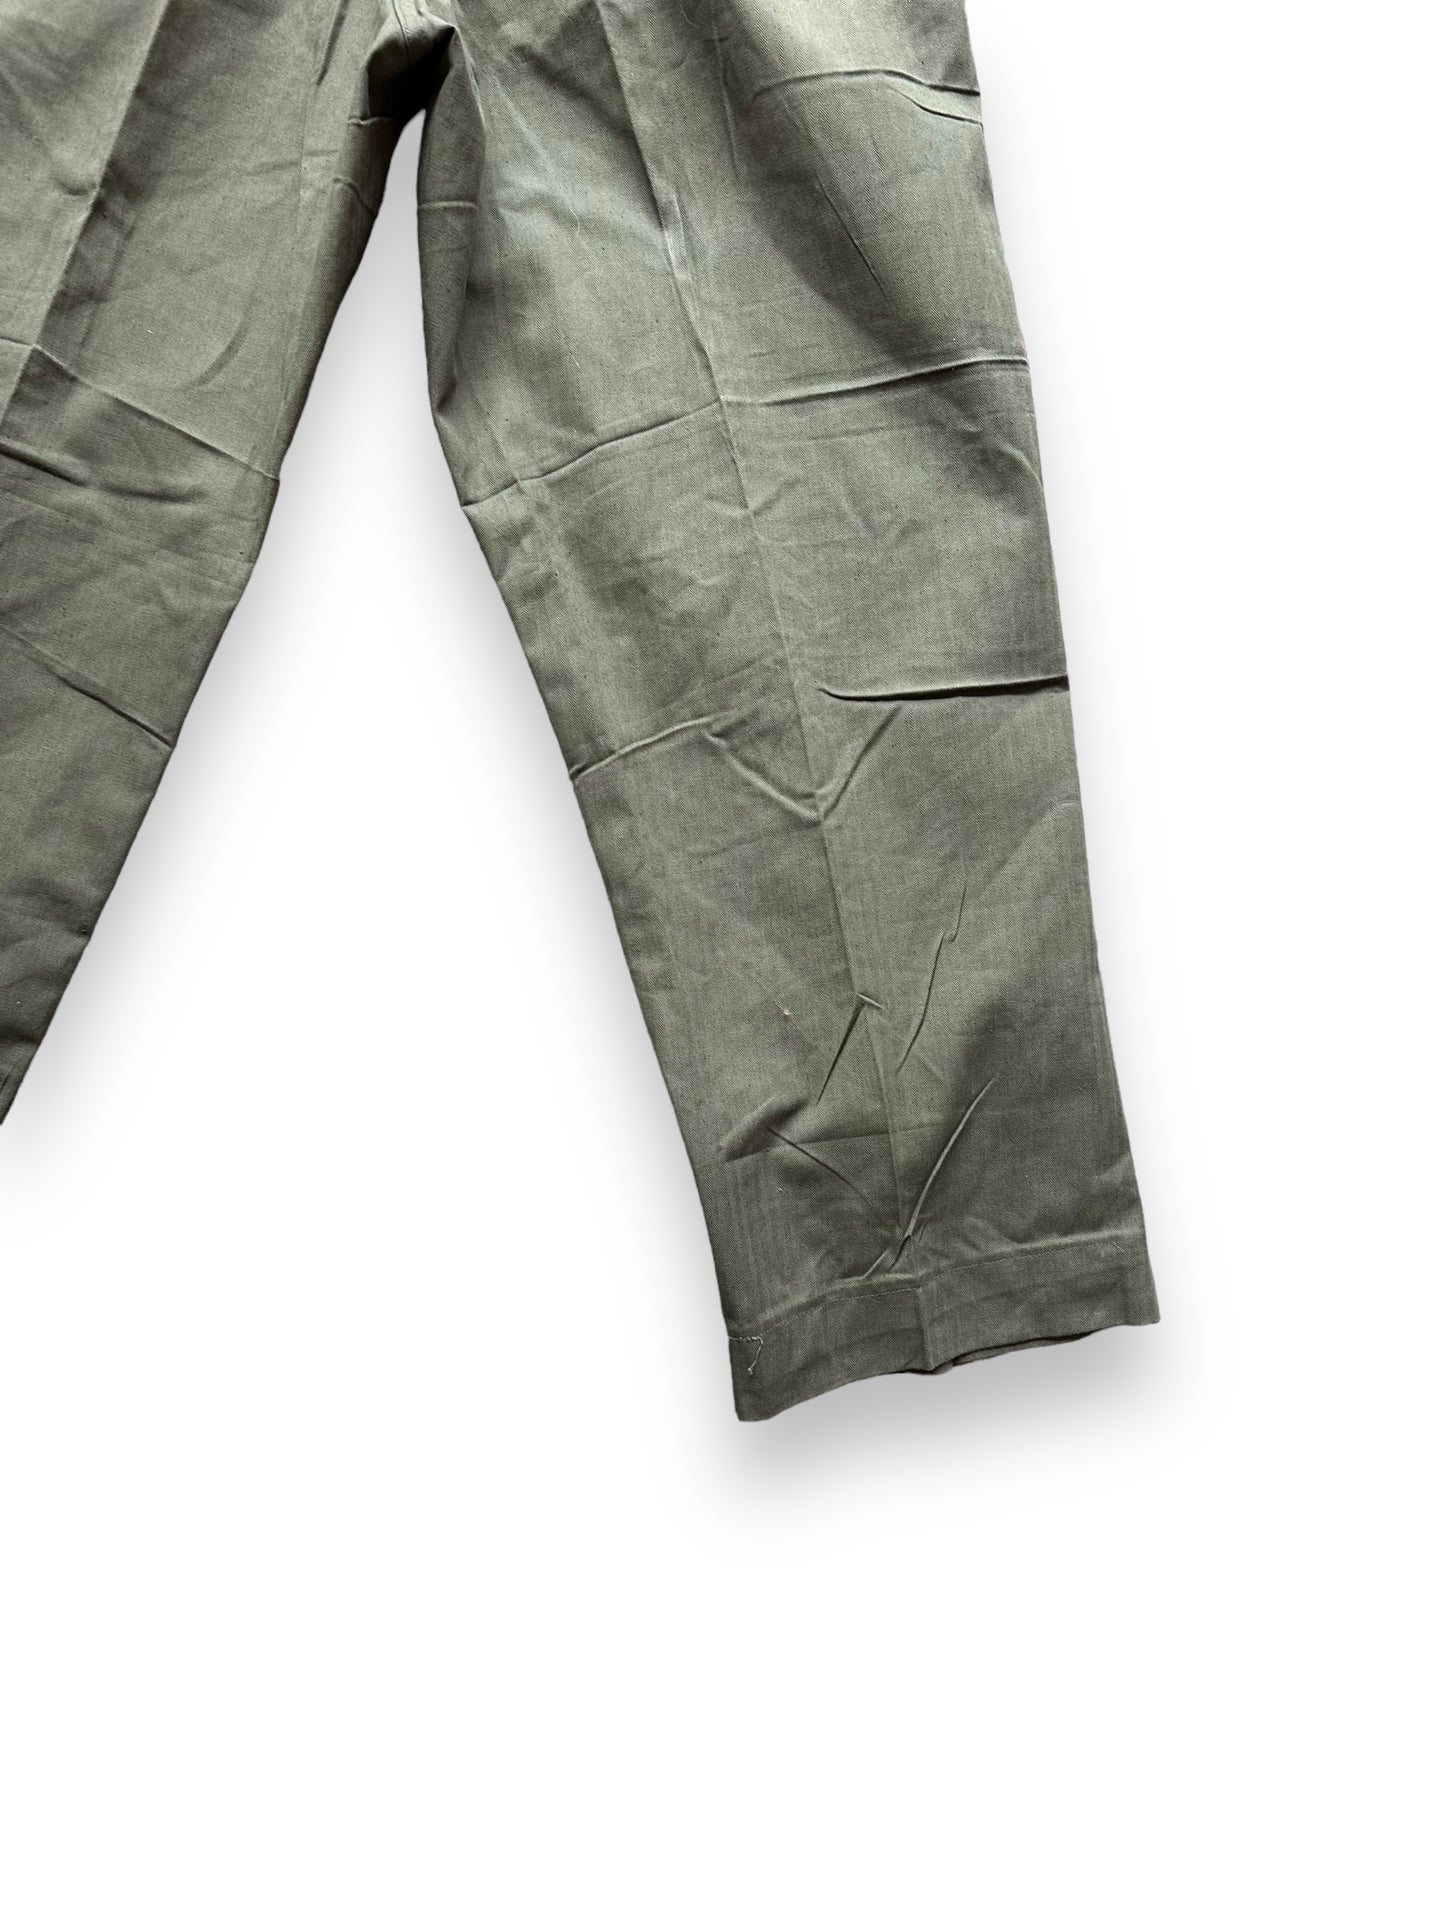 Rear Right Lower View of Vintage WWII M-43 HBT Field Cotton Trousers Olive Drab W34 | Barn Owl Vintage Seattle | Vintage Military Trousers Seattle